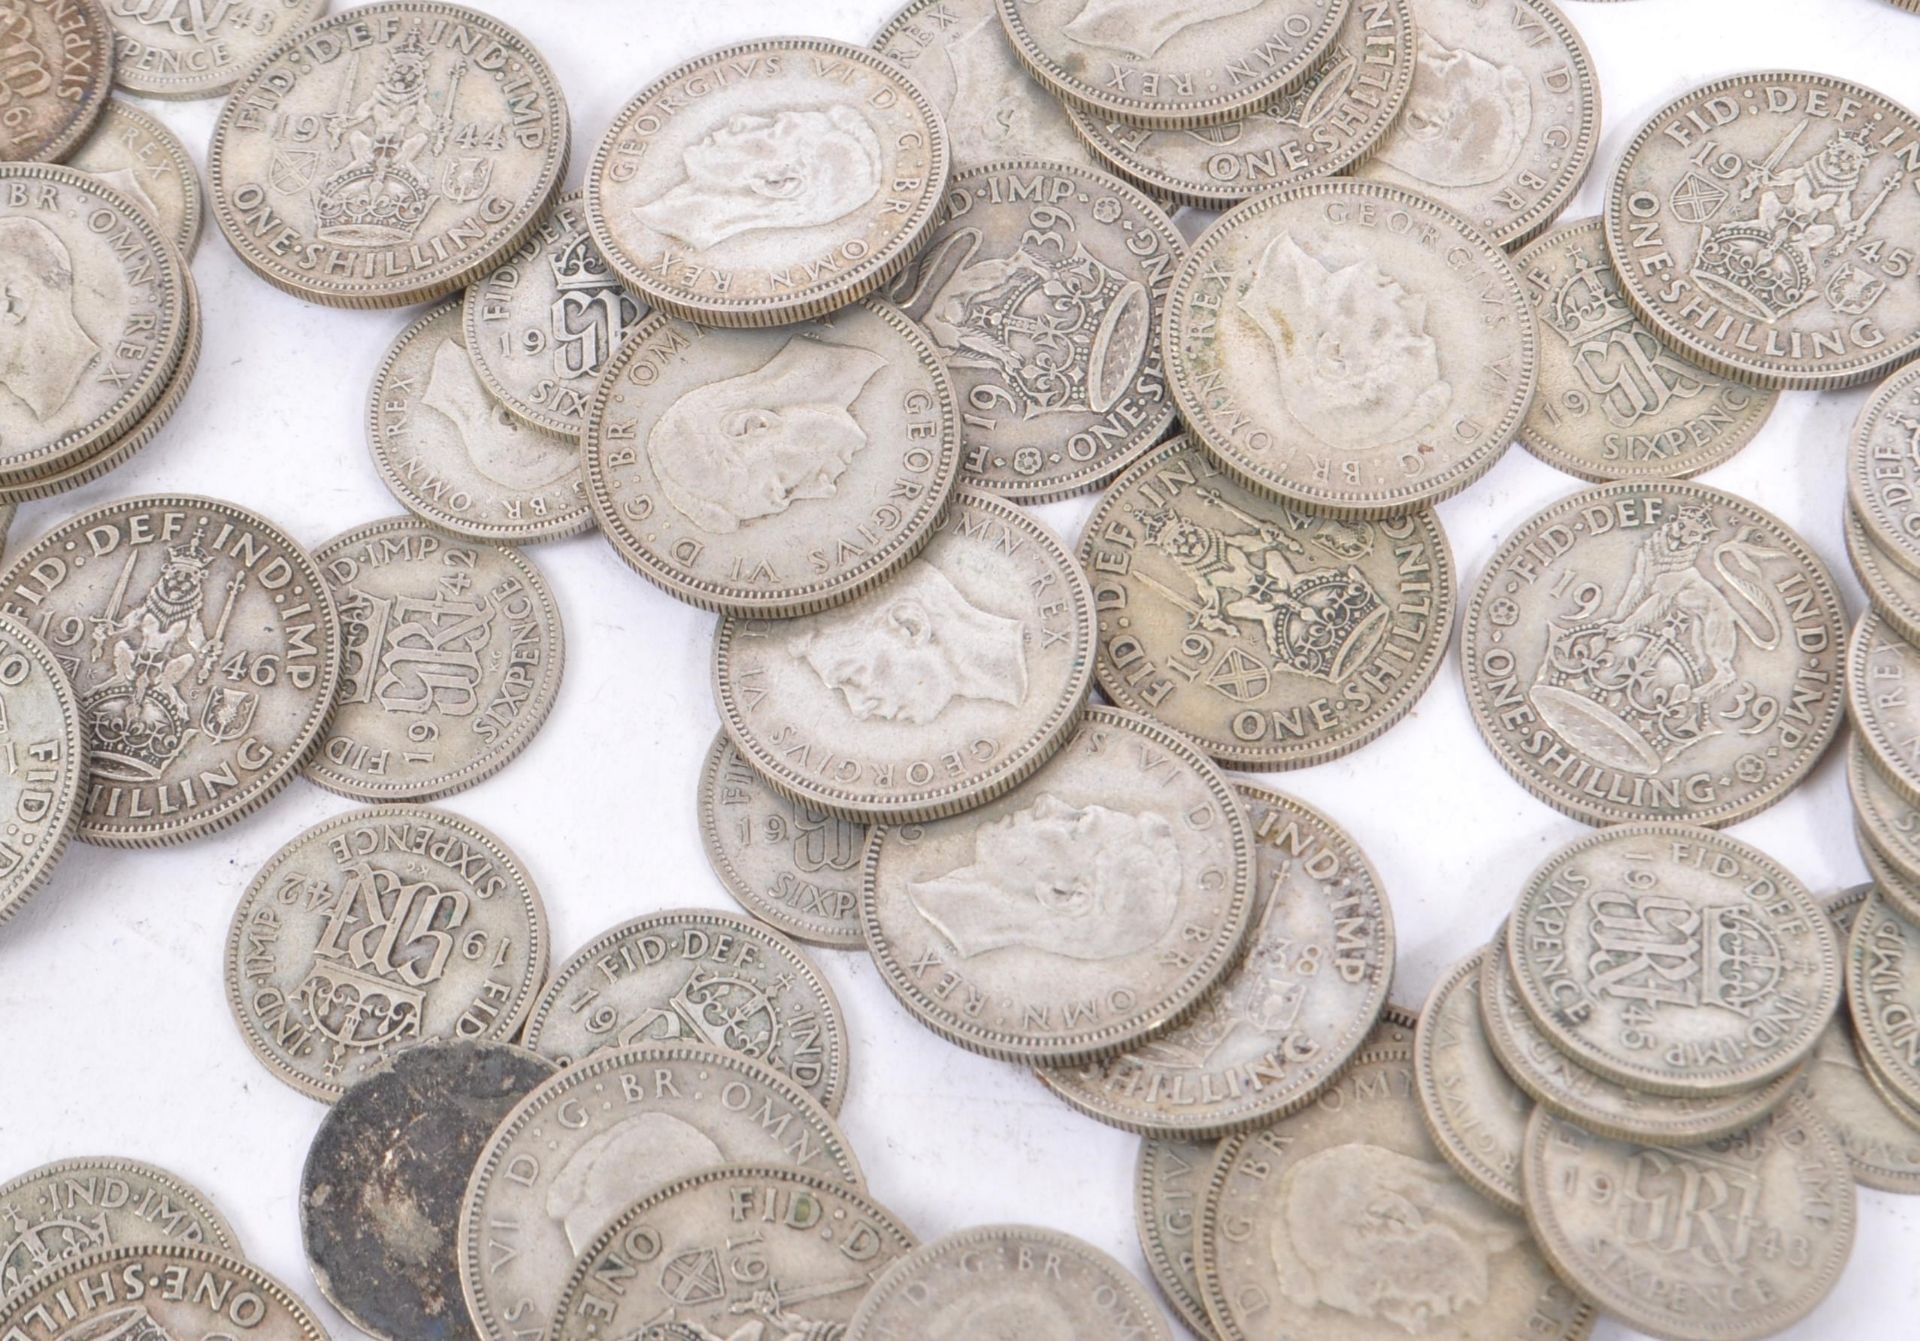 COLLECTION PRE 1946 BRITISH SIXPENCE & SHILLING COINS - Image 2 of 8